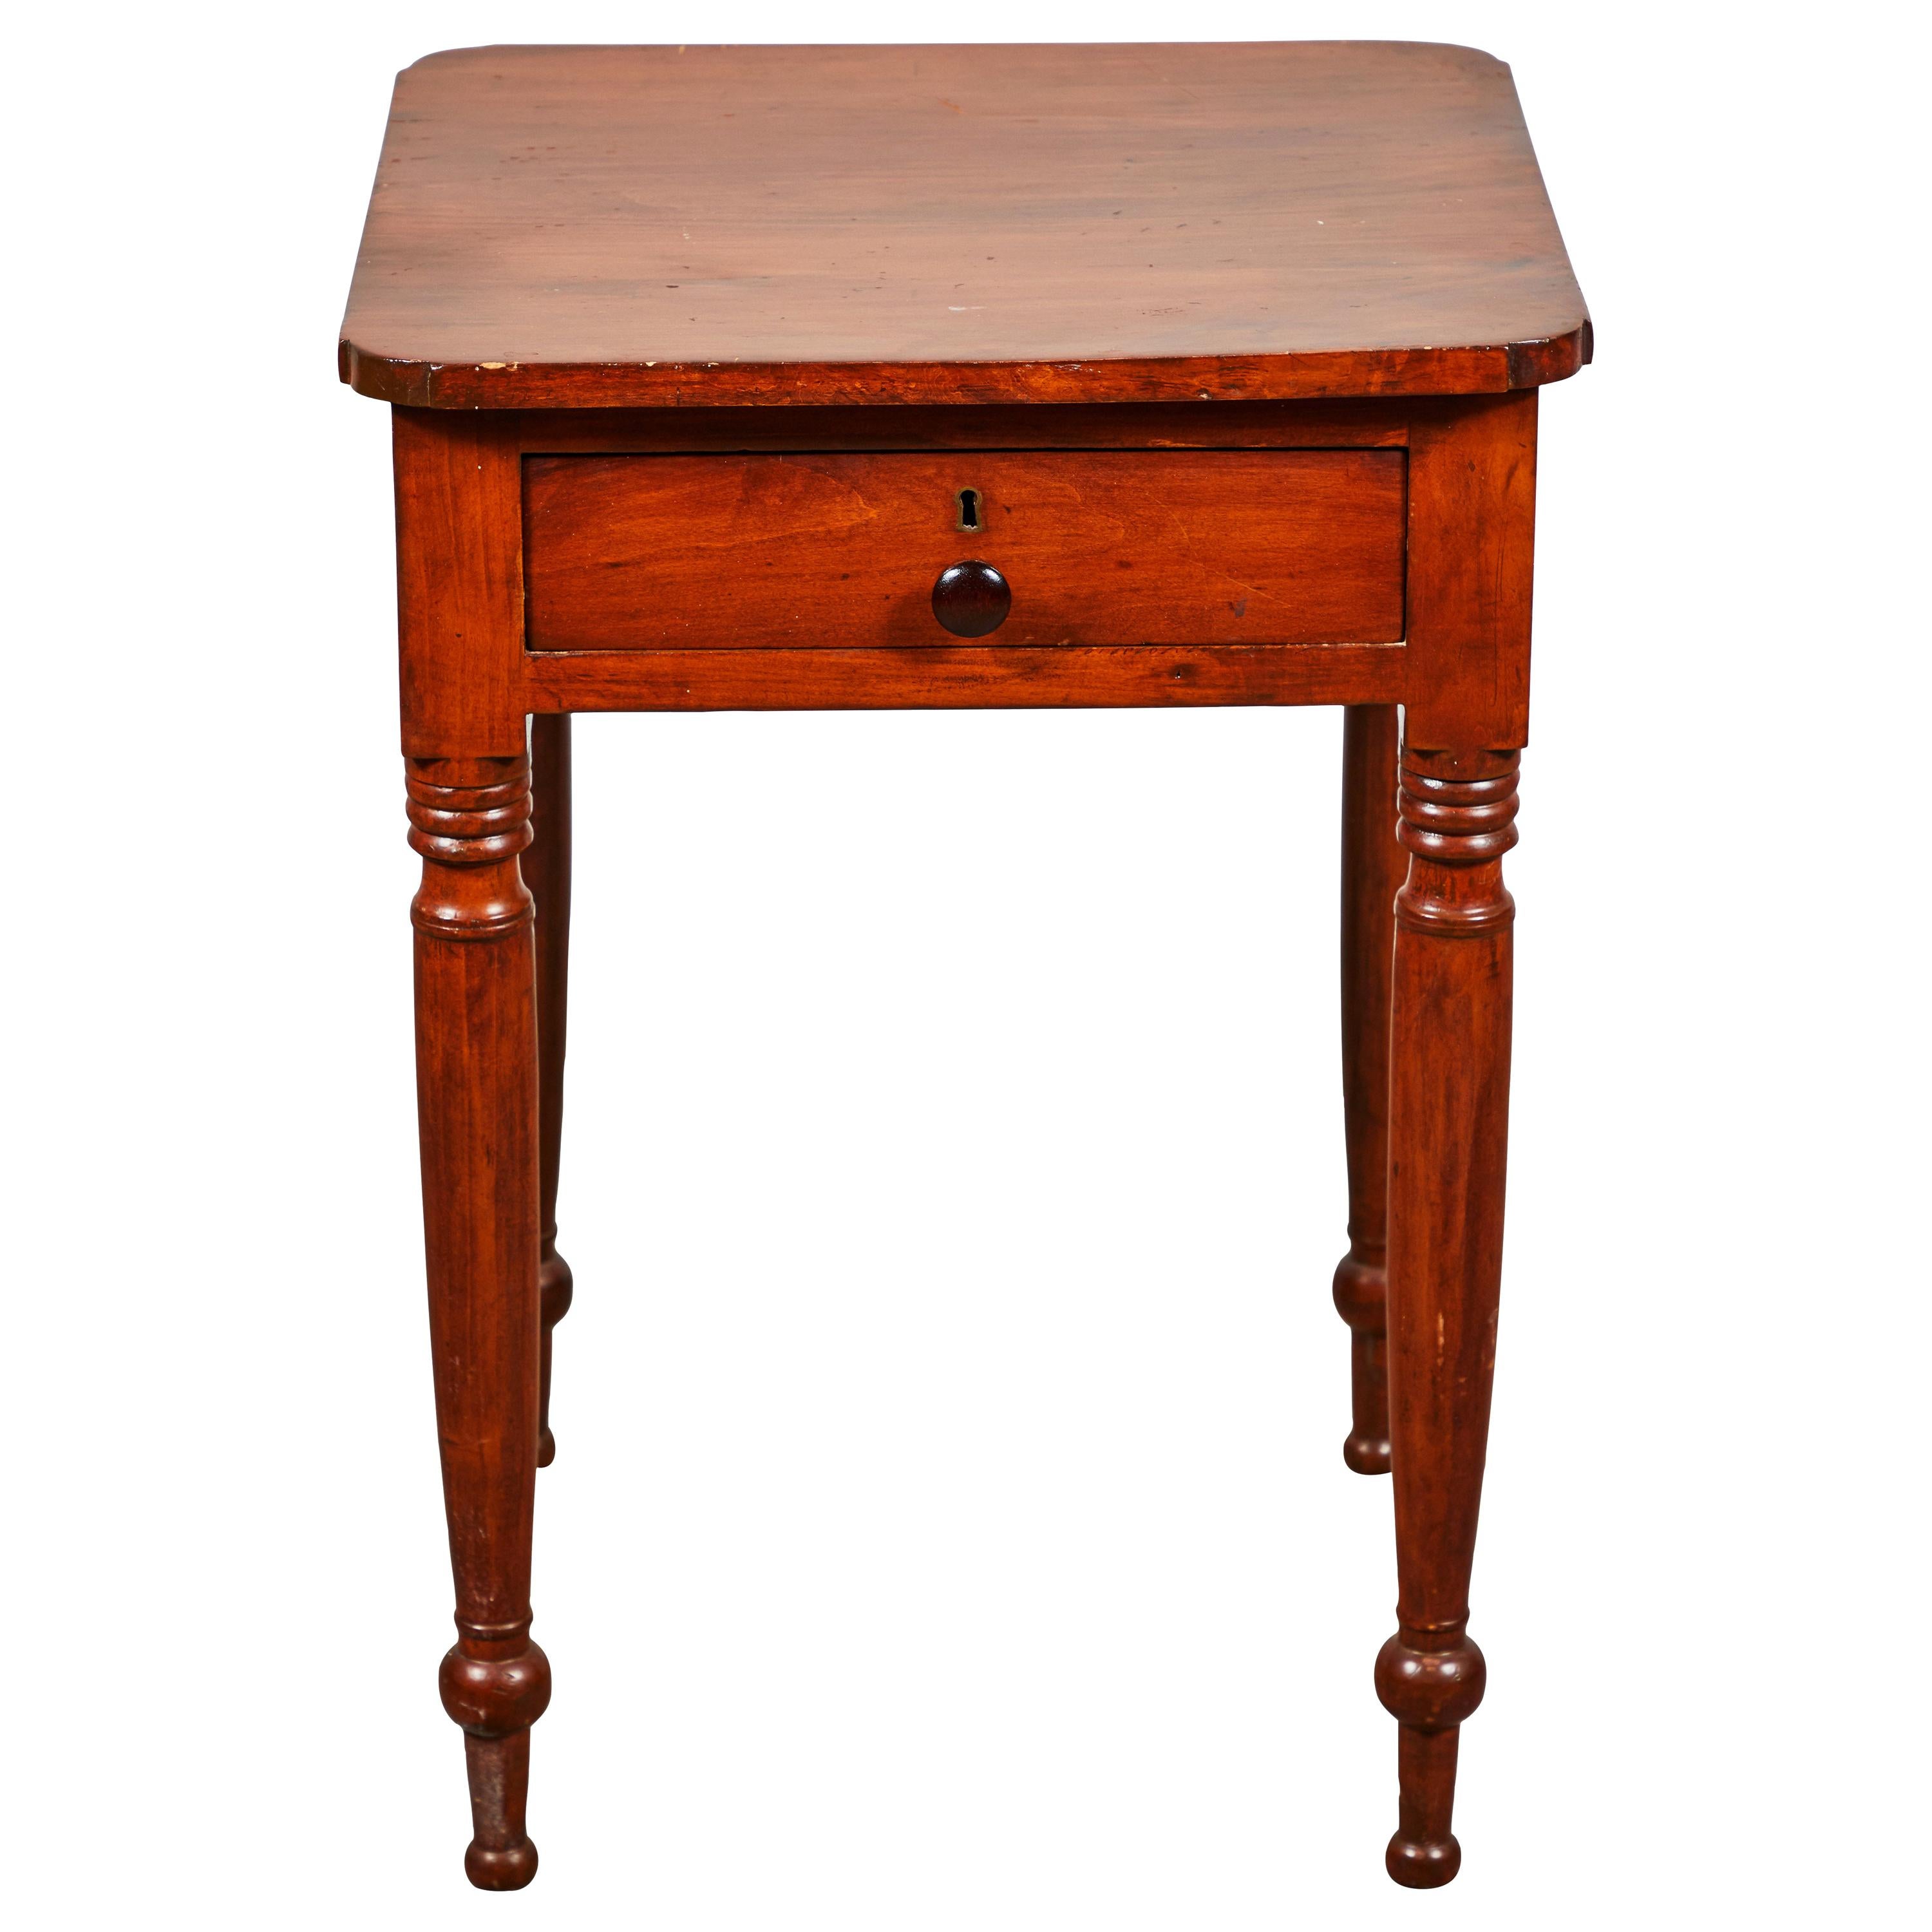 Early American Side Table with Drawer and Turned Legs